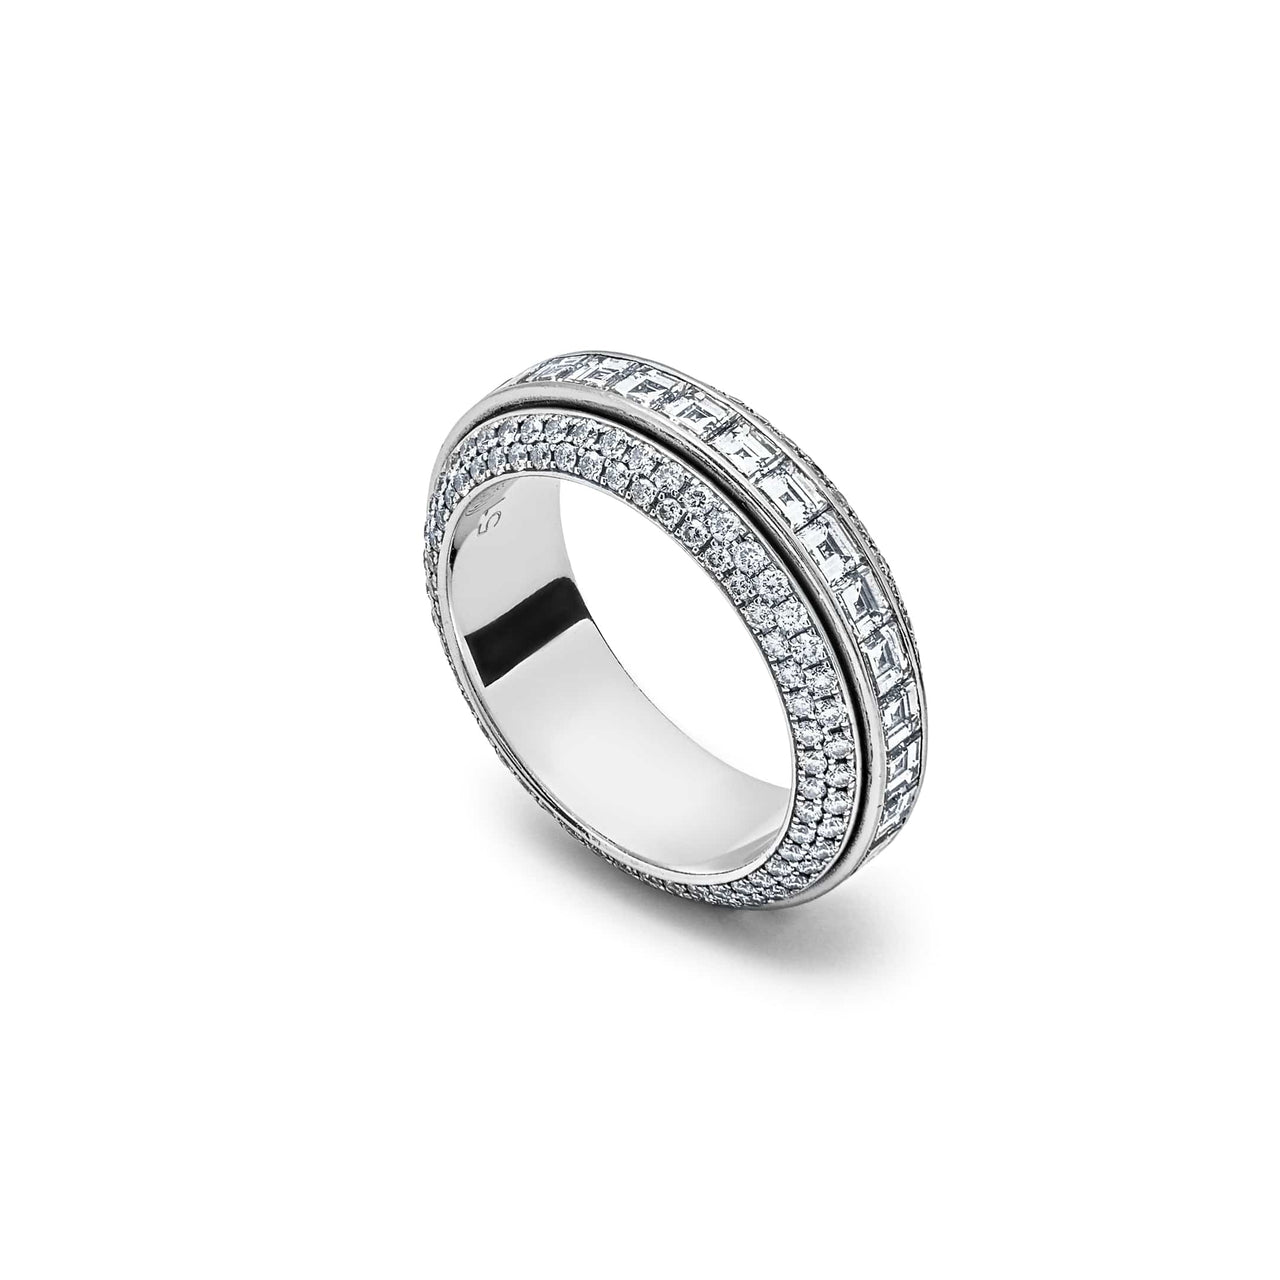 Piaget 'Possession Collection' White Gold and Diamond Band